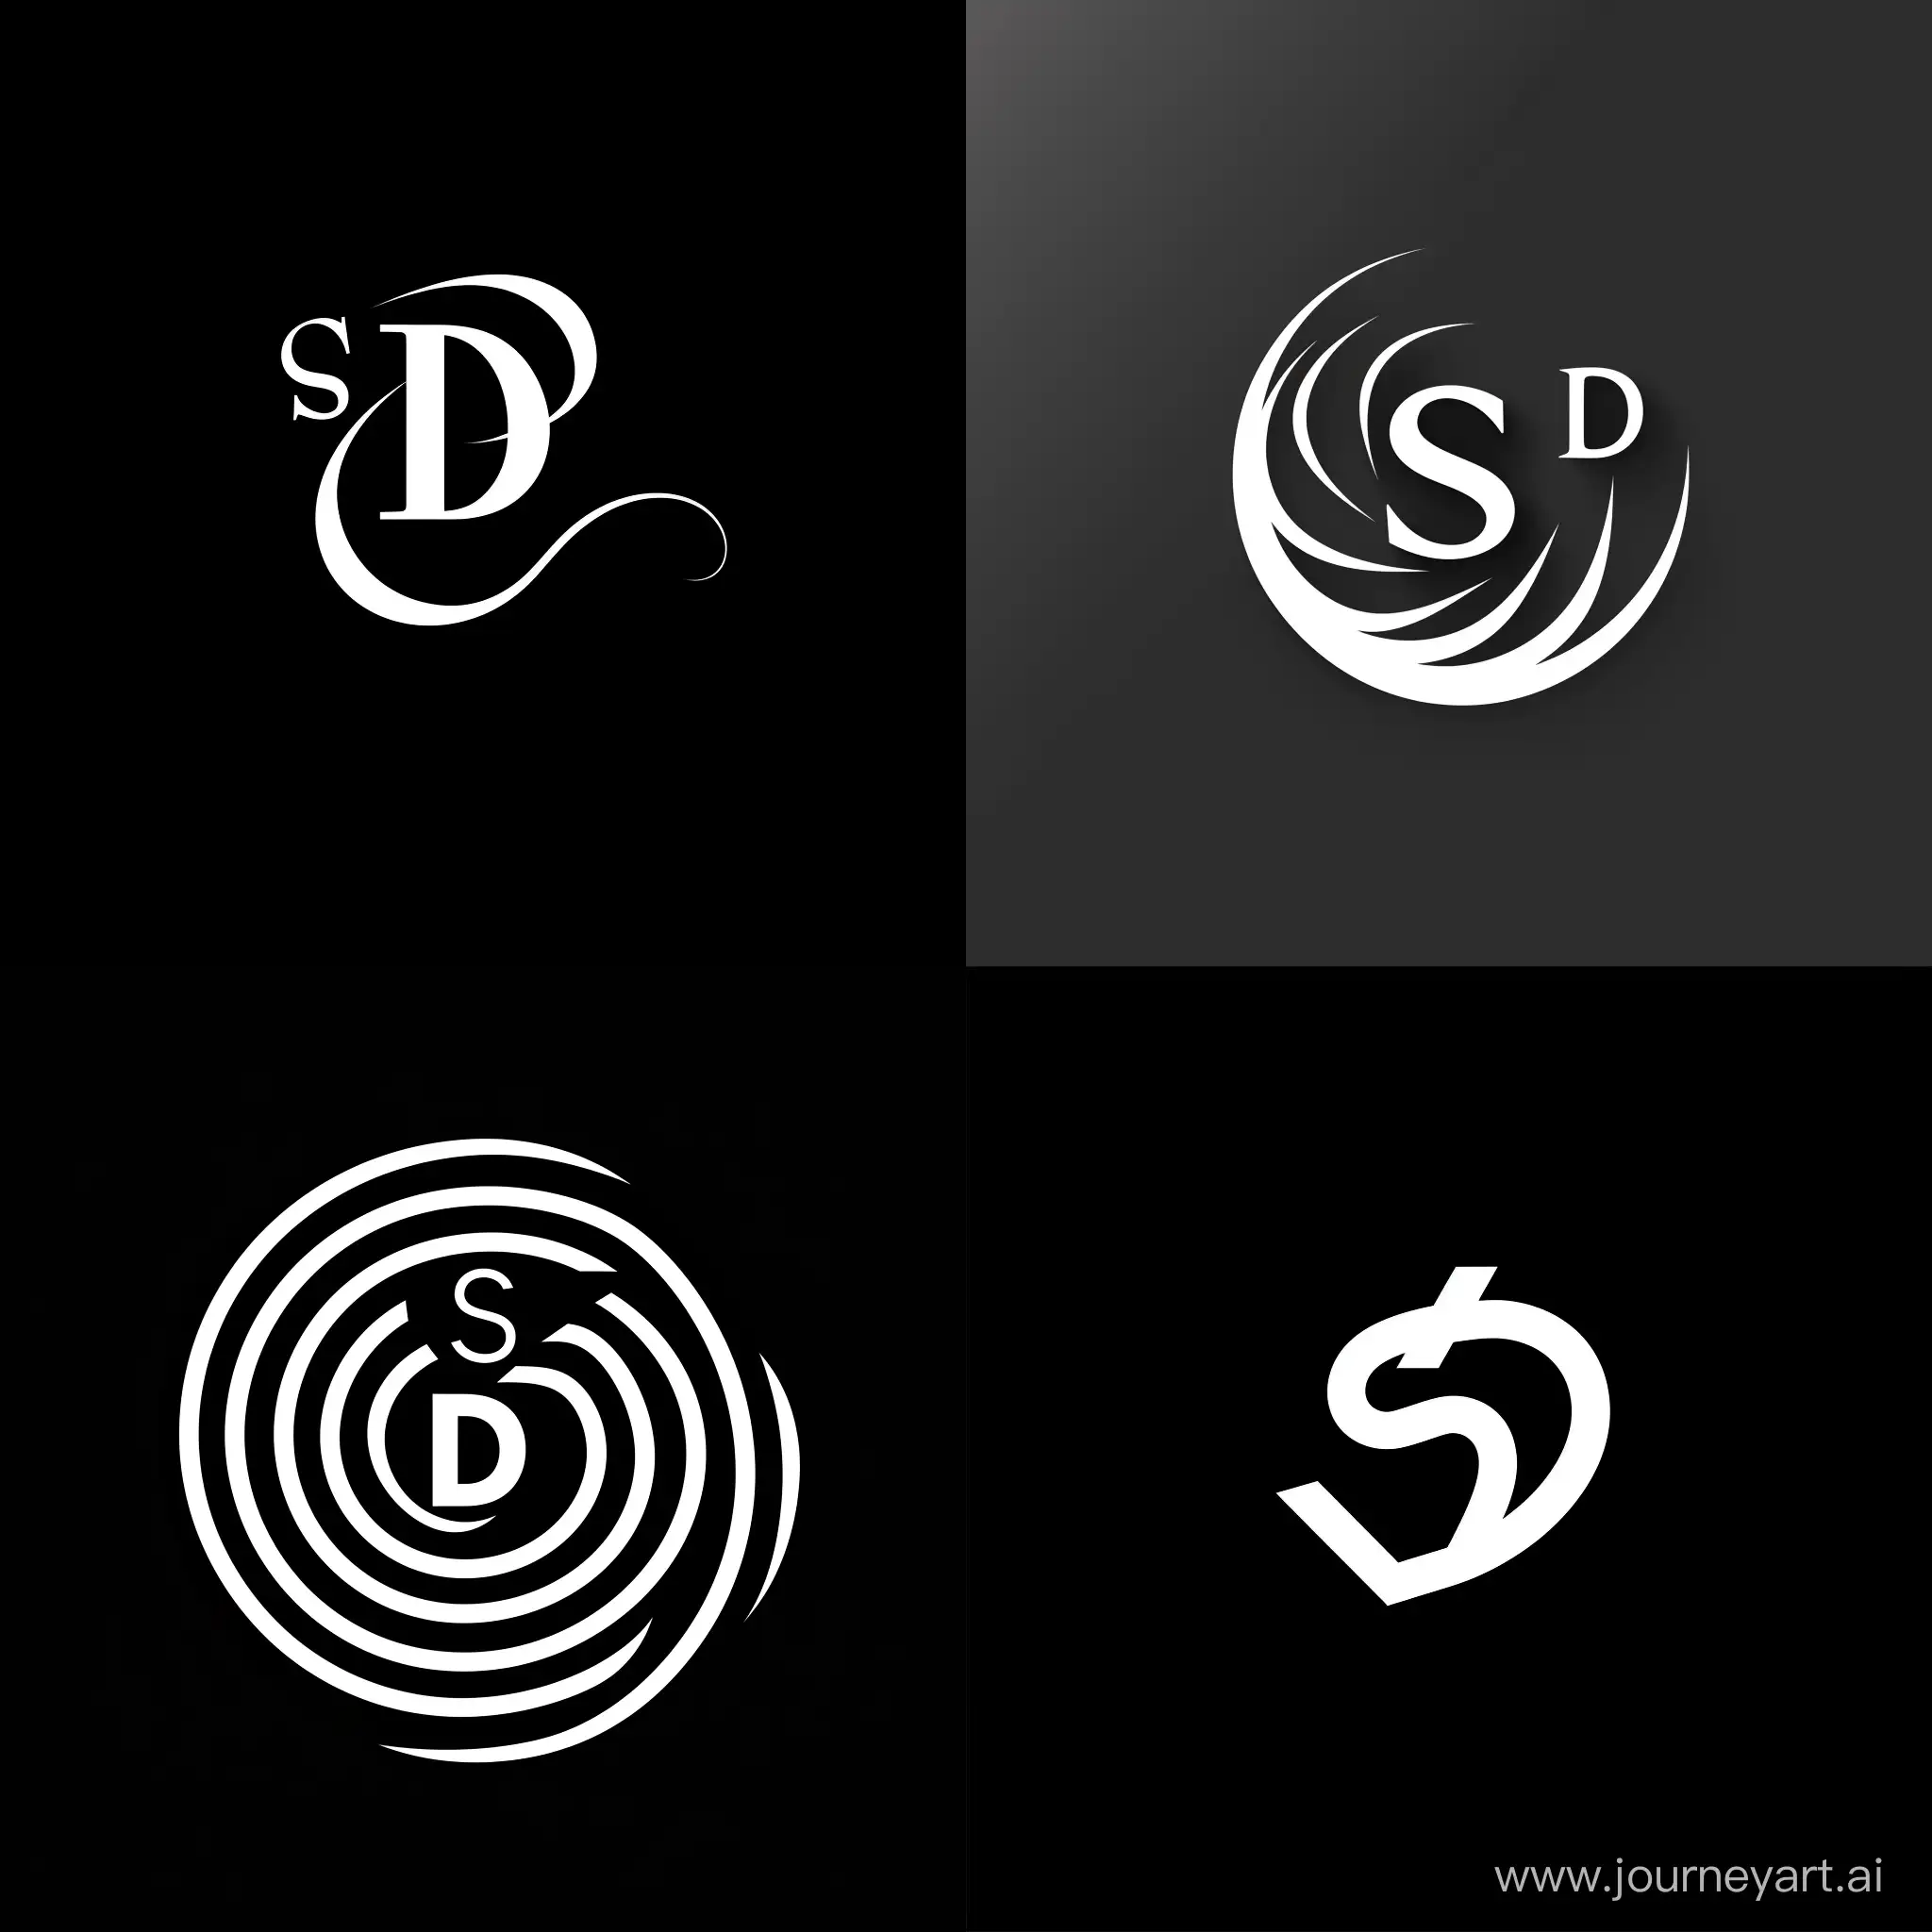 Imagine a brand logo using S and D which focuses on motivation and selfdevelopment with the color of black and white